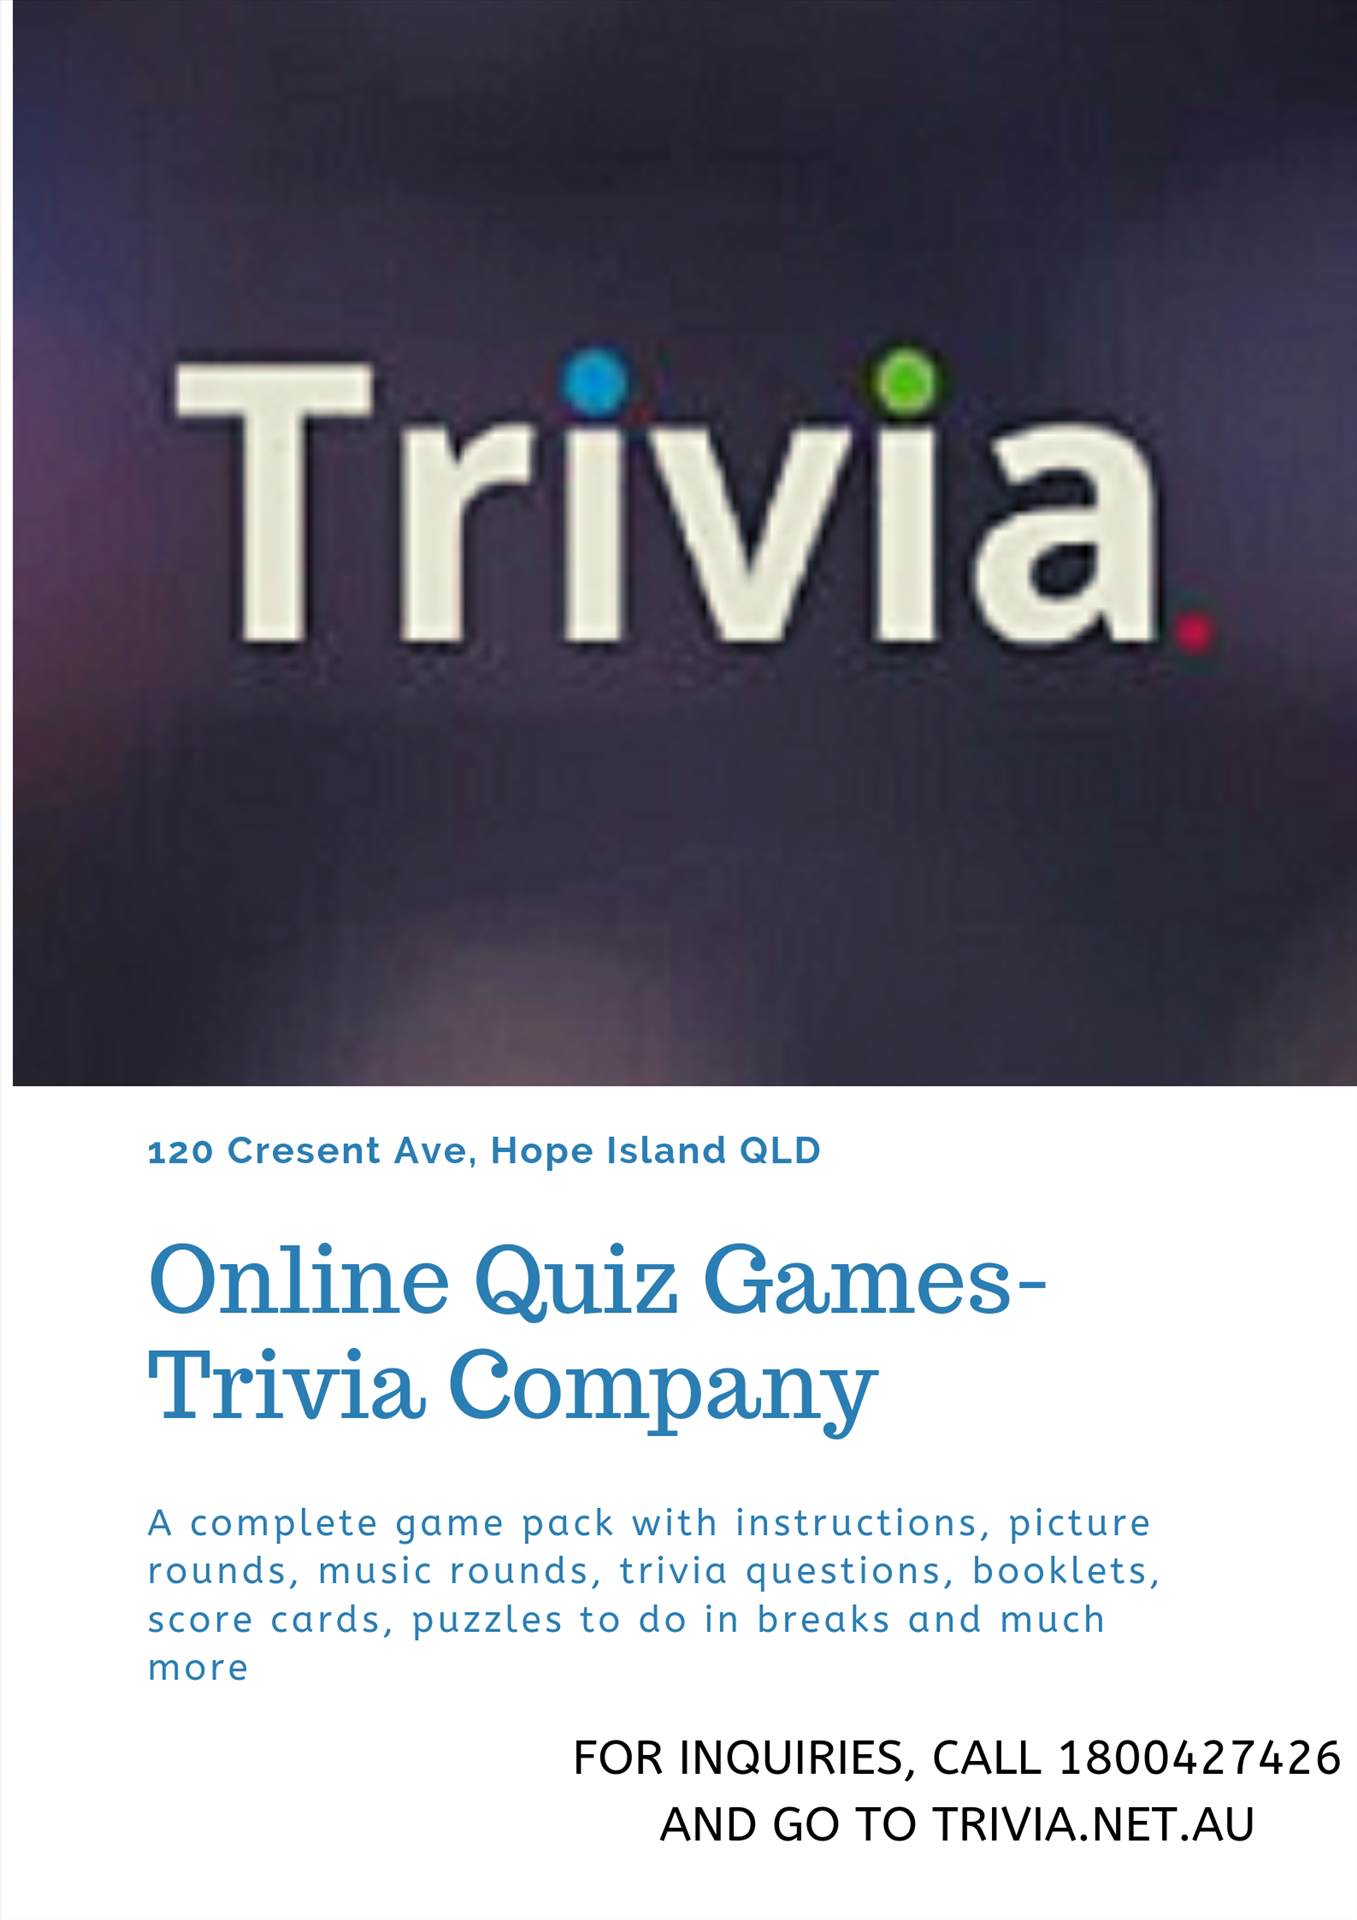 Online Quiz Games-Trivia Company.png  by triviacompany